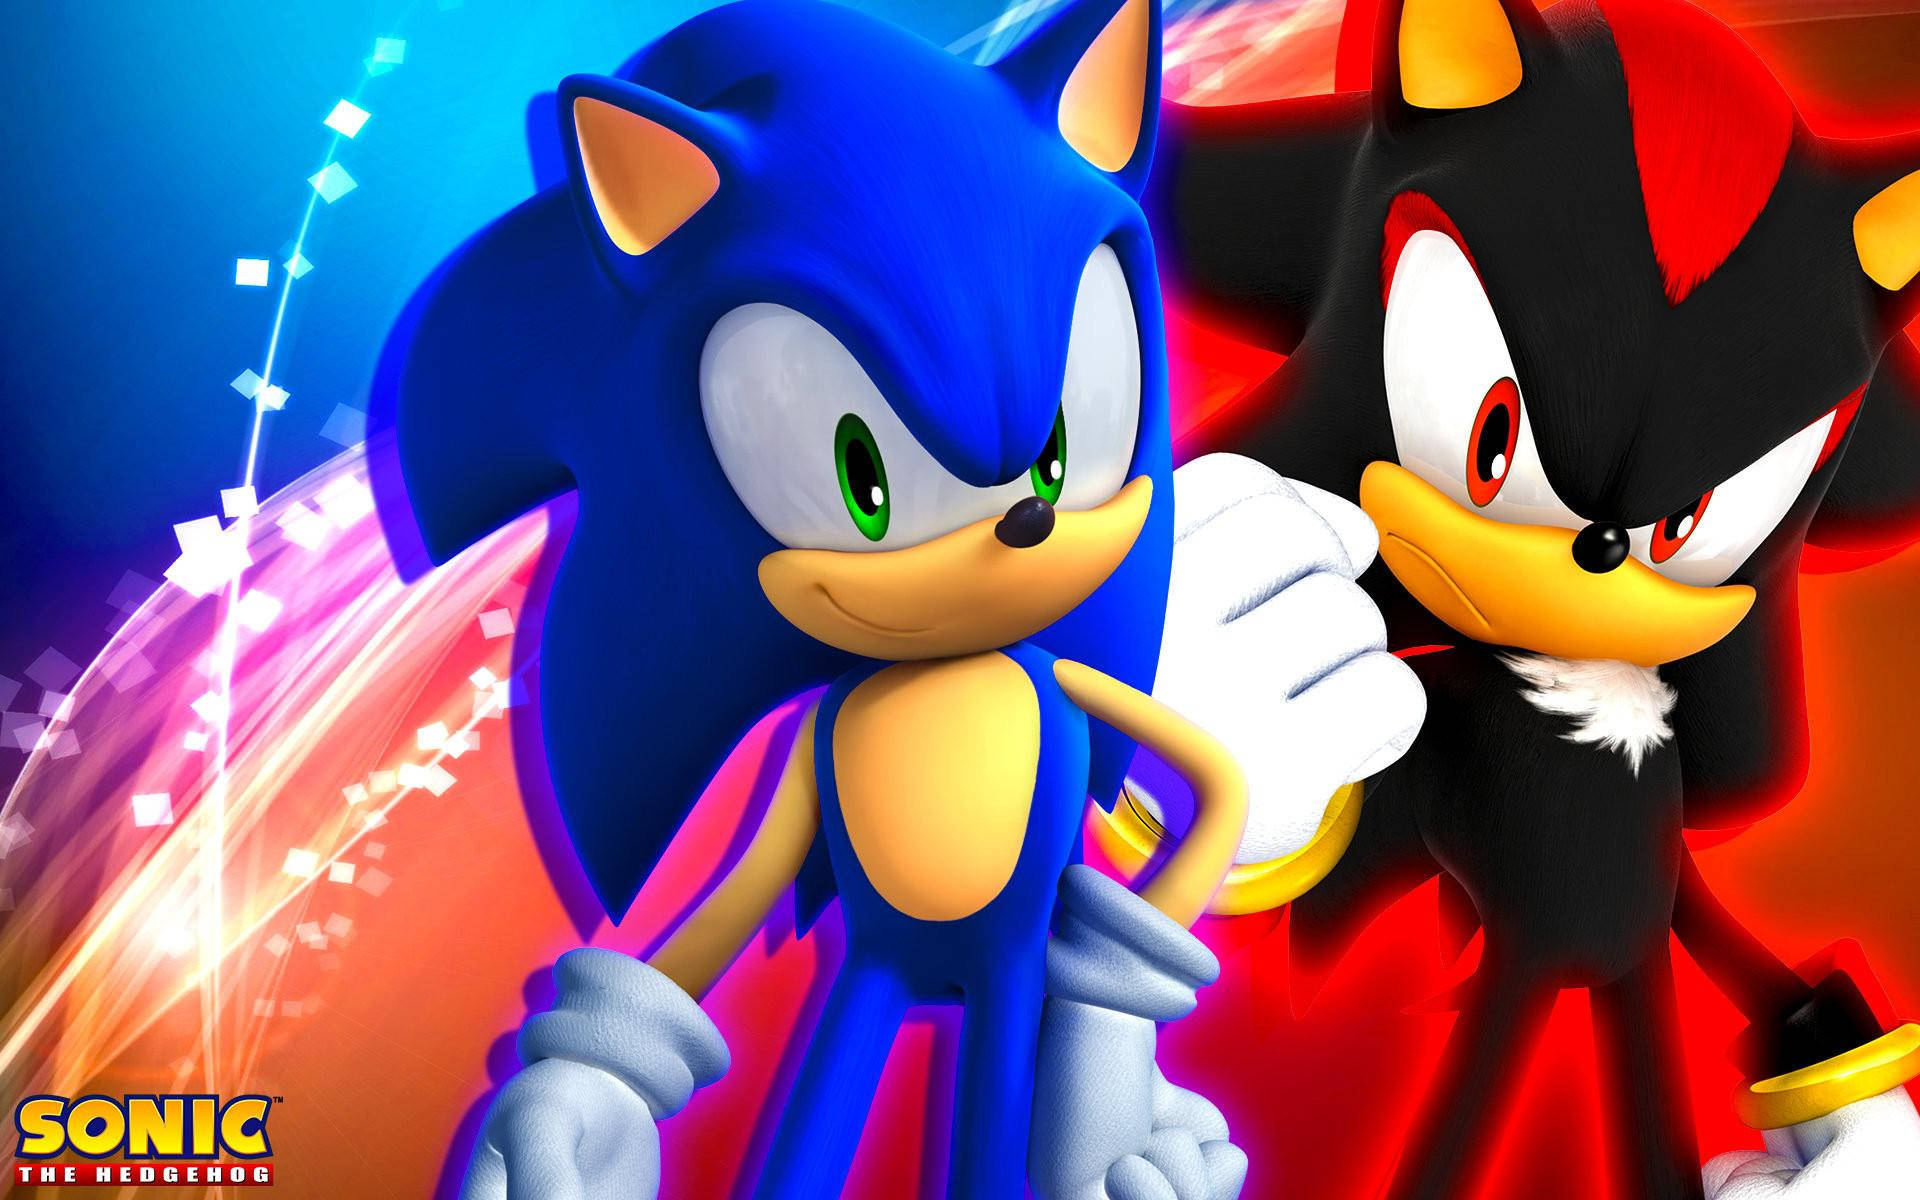 Download Sonic The Hedgehog And Shadow The Hedgehog Pfp Wallpaper